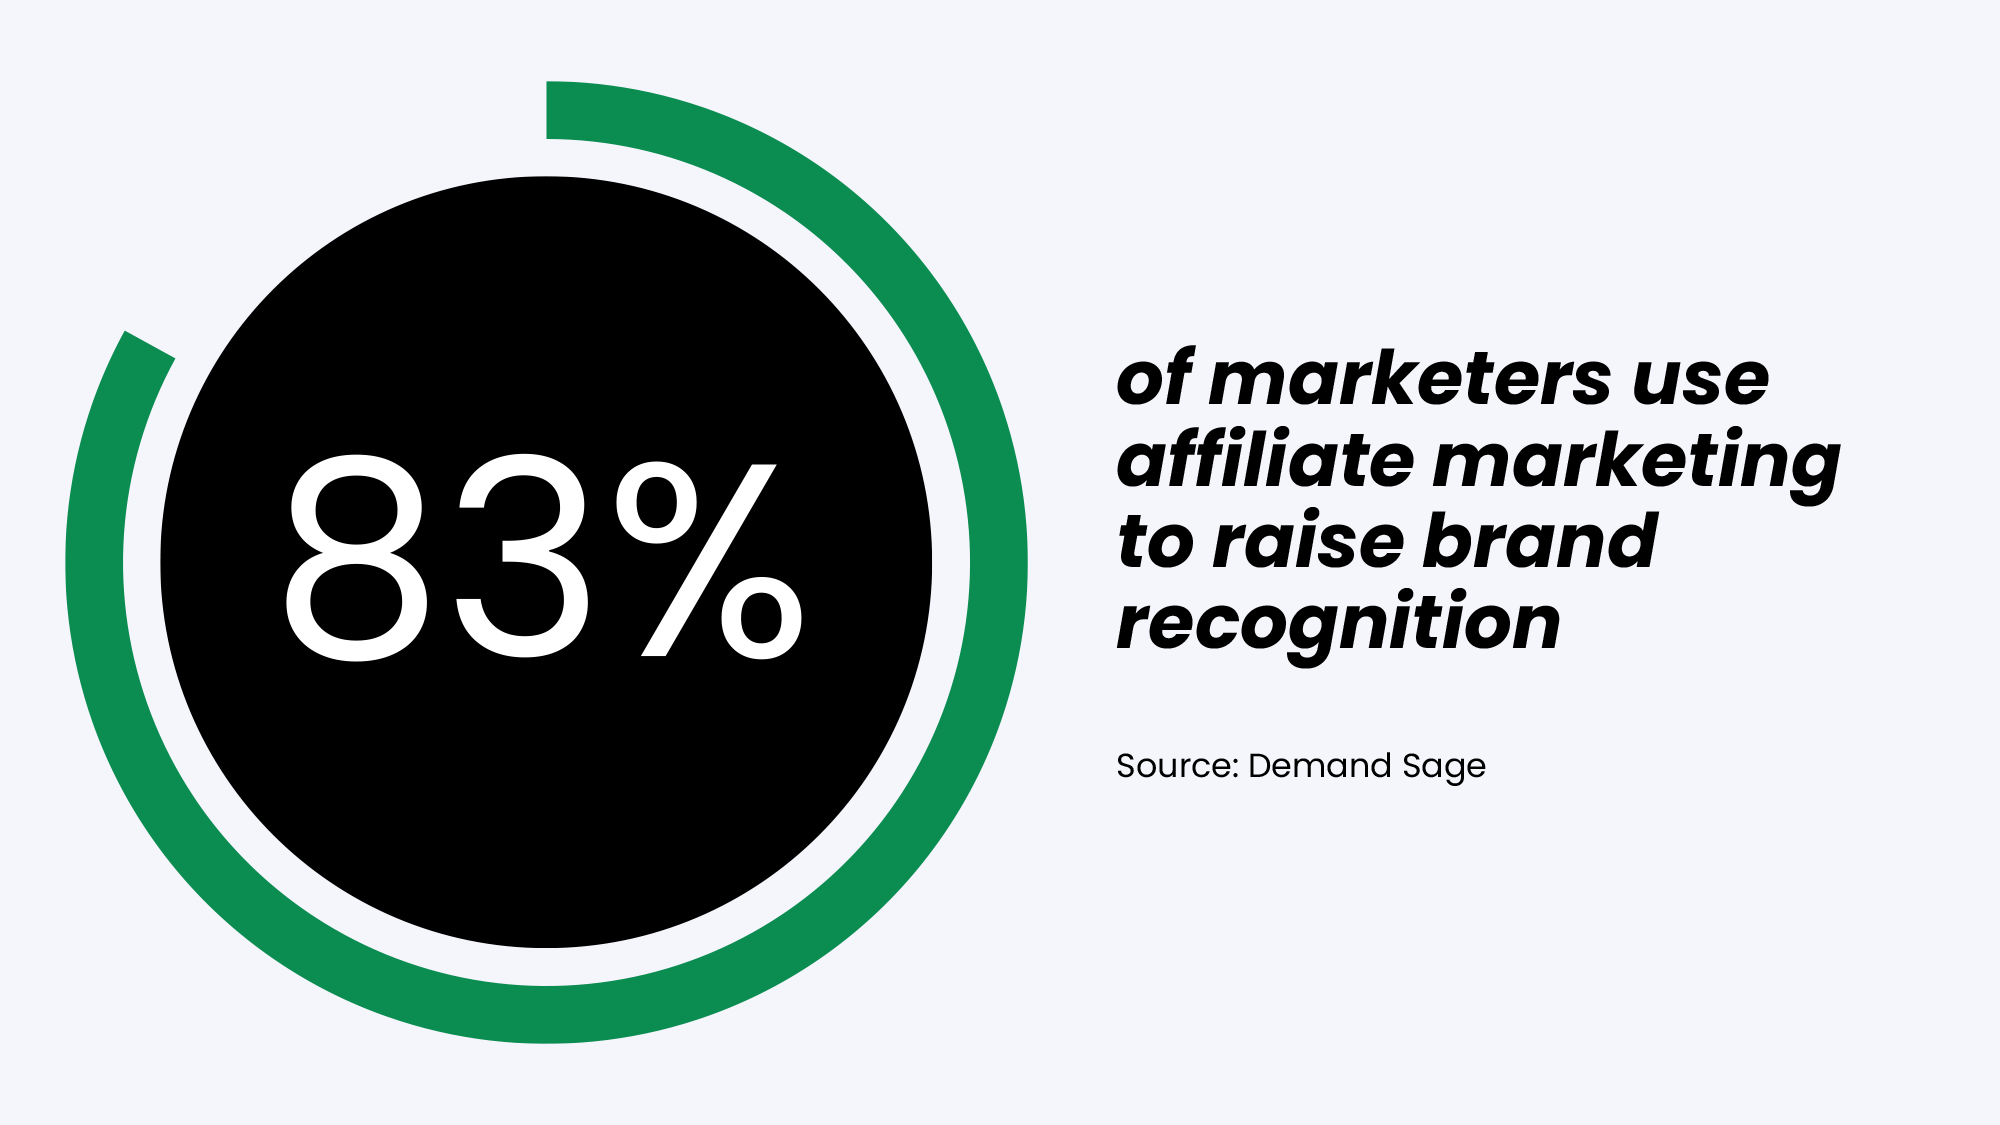 83% of marketers use affiliate marketing  to raise brand recognition